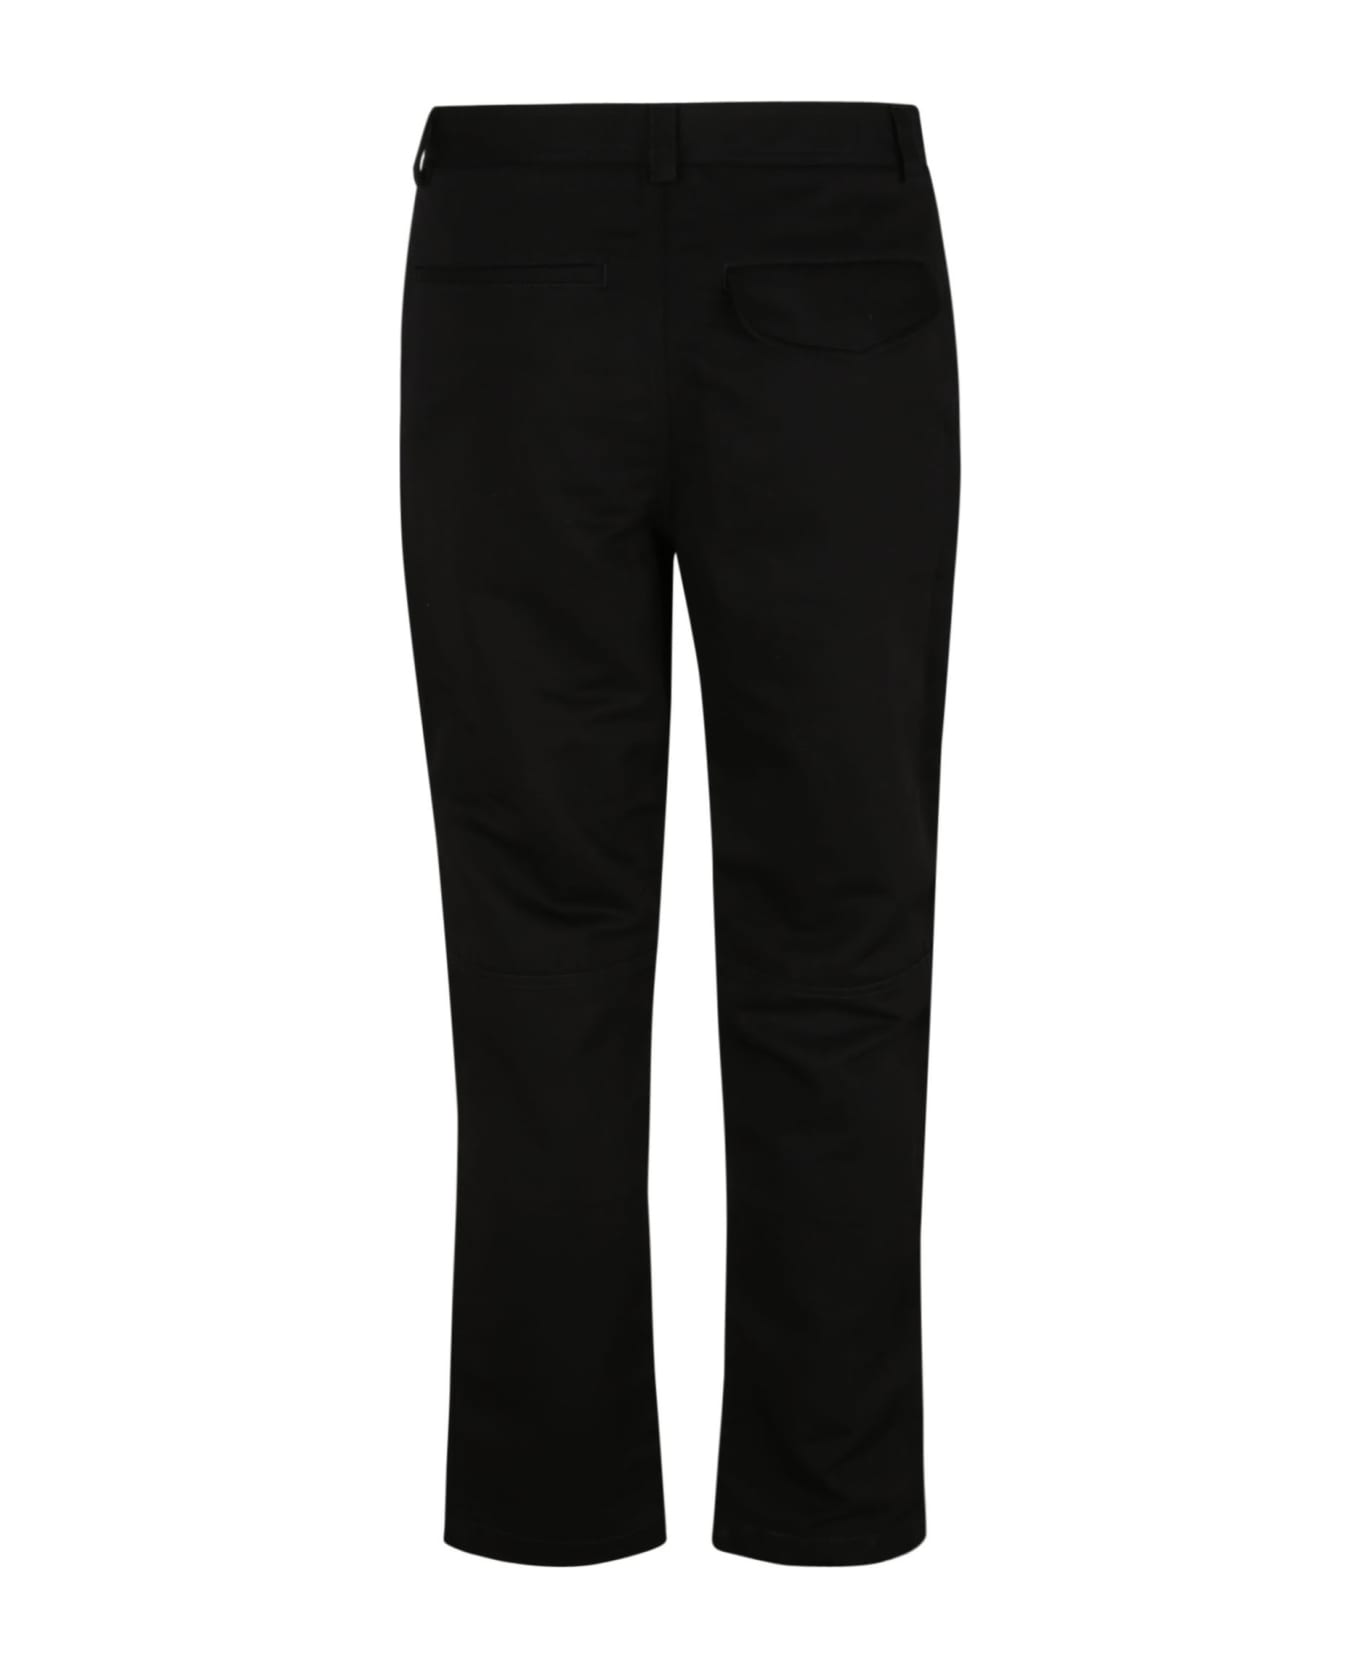 Burberry Buttoned Trousers - Black